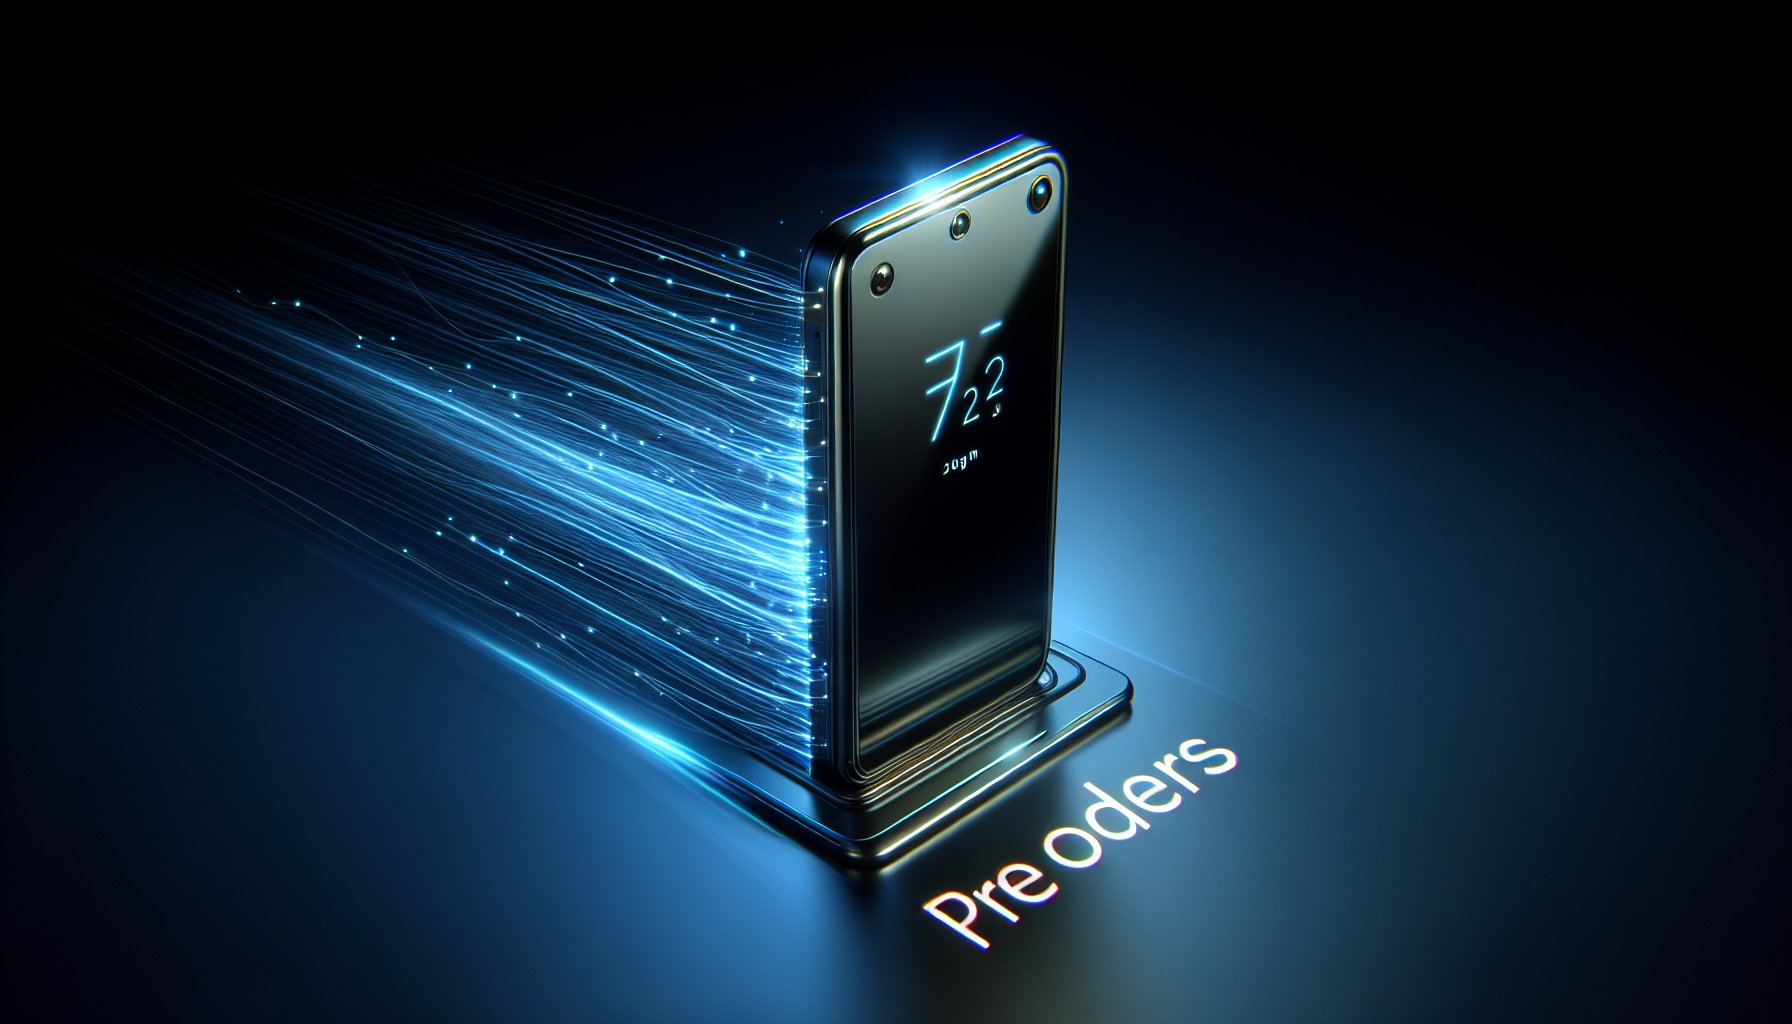 Today is the last day to preorder Samsung's Galaxy S23 phones and